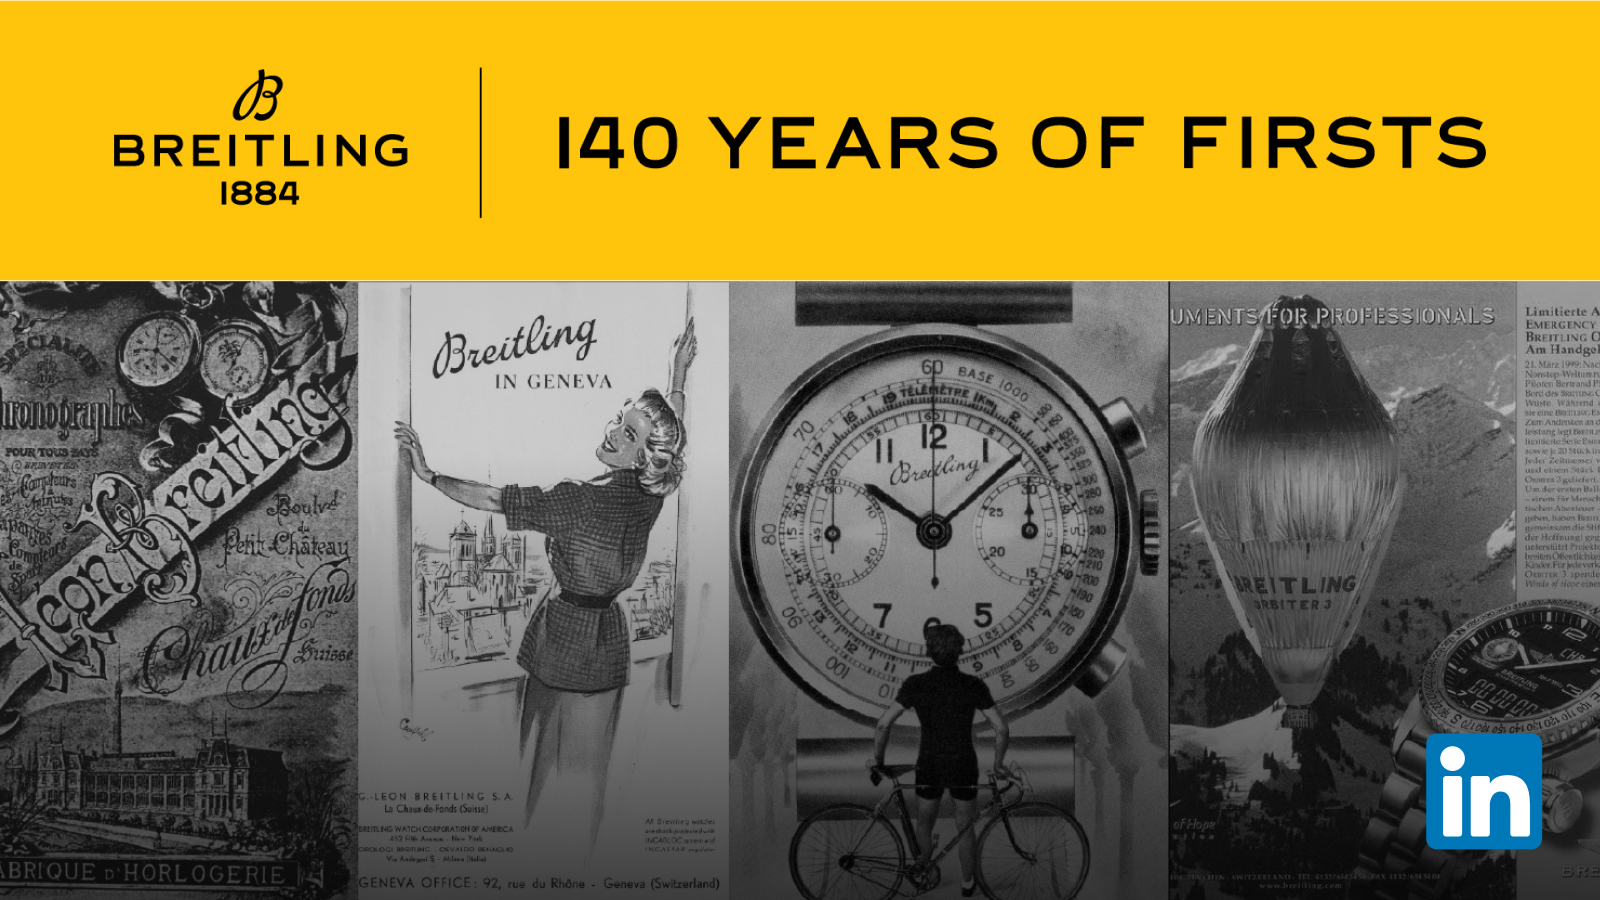 Follow Breitling&#039;s journey on LinkedIn and subscribe to our newsletter “Since 1884” for all heritage-related content.